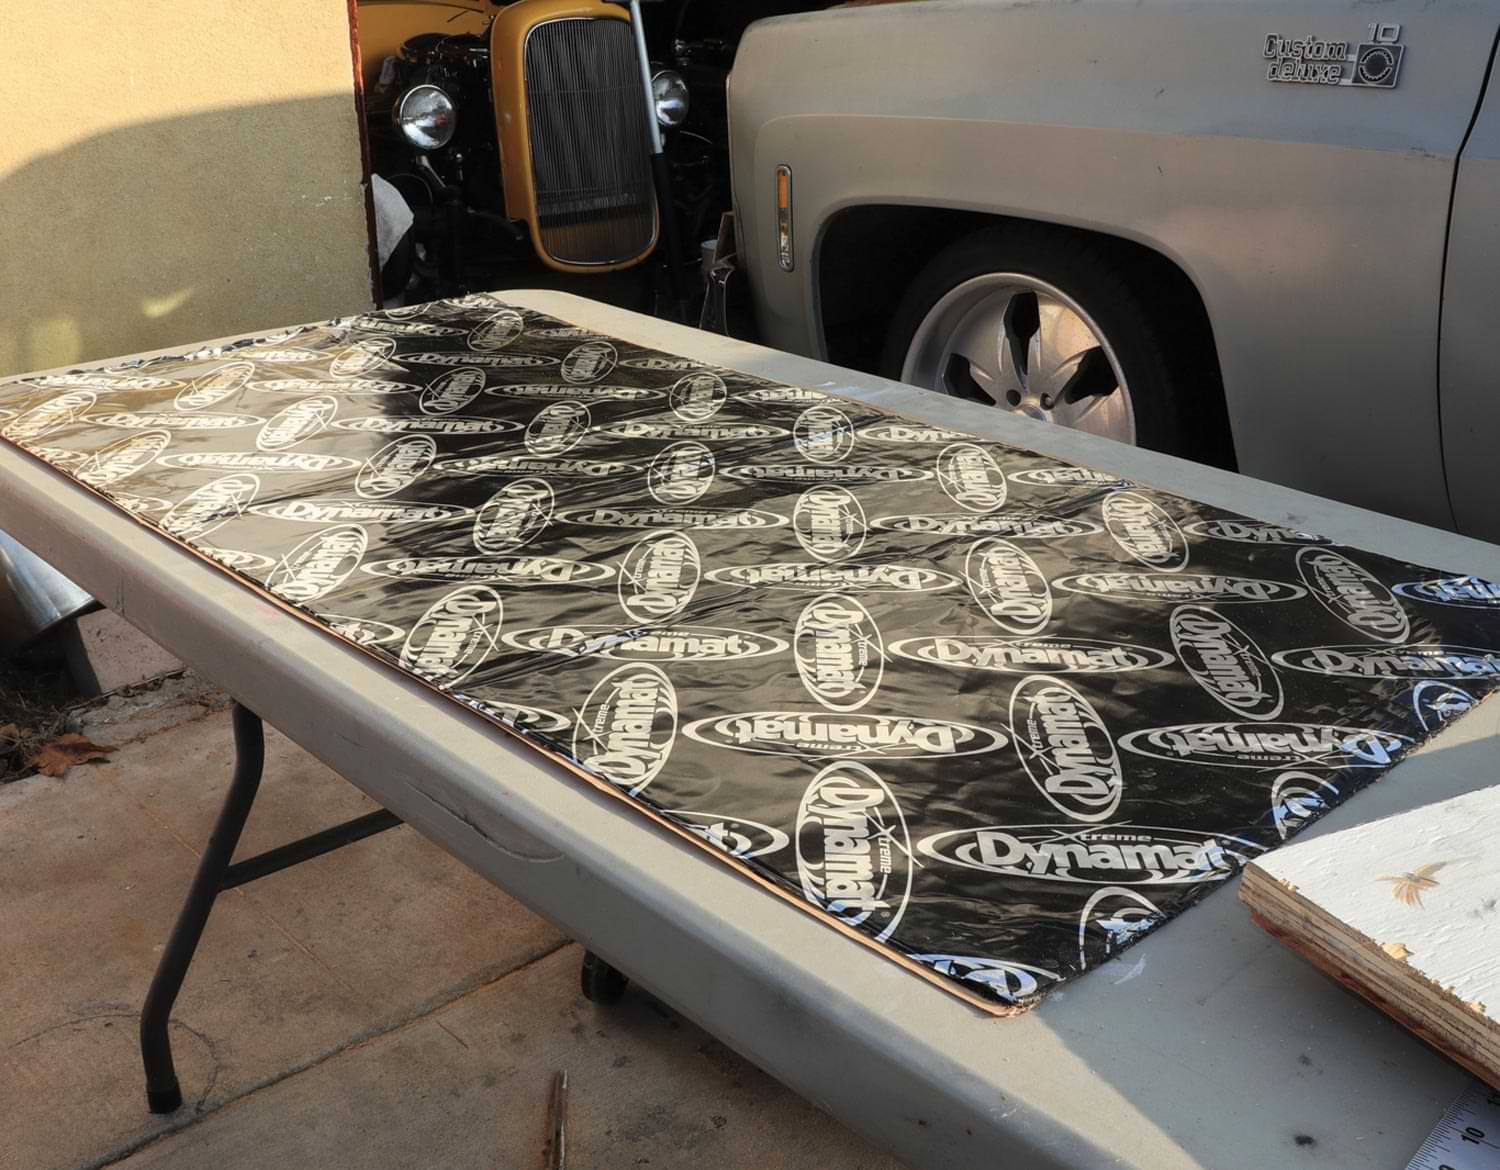 a table holds sheets of Dynamat Xtreme in preparation for installation